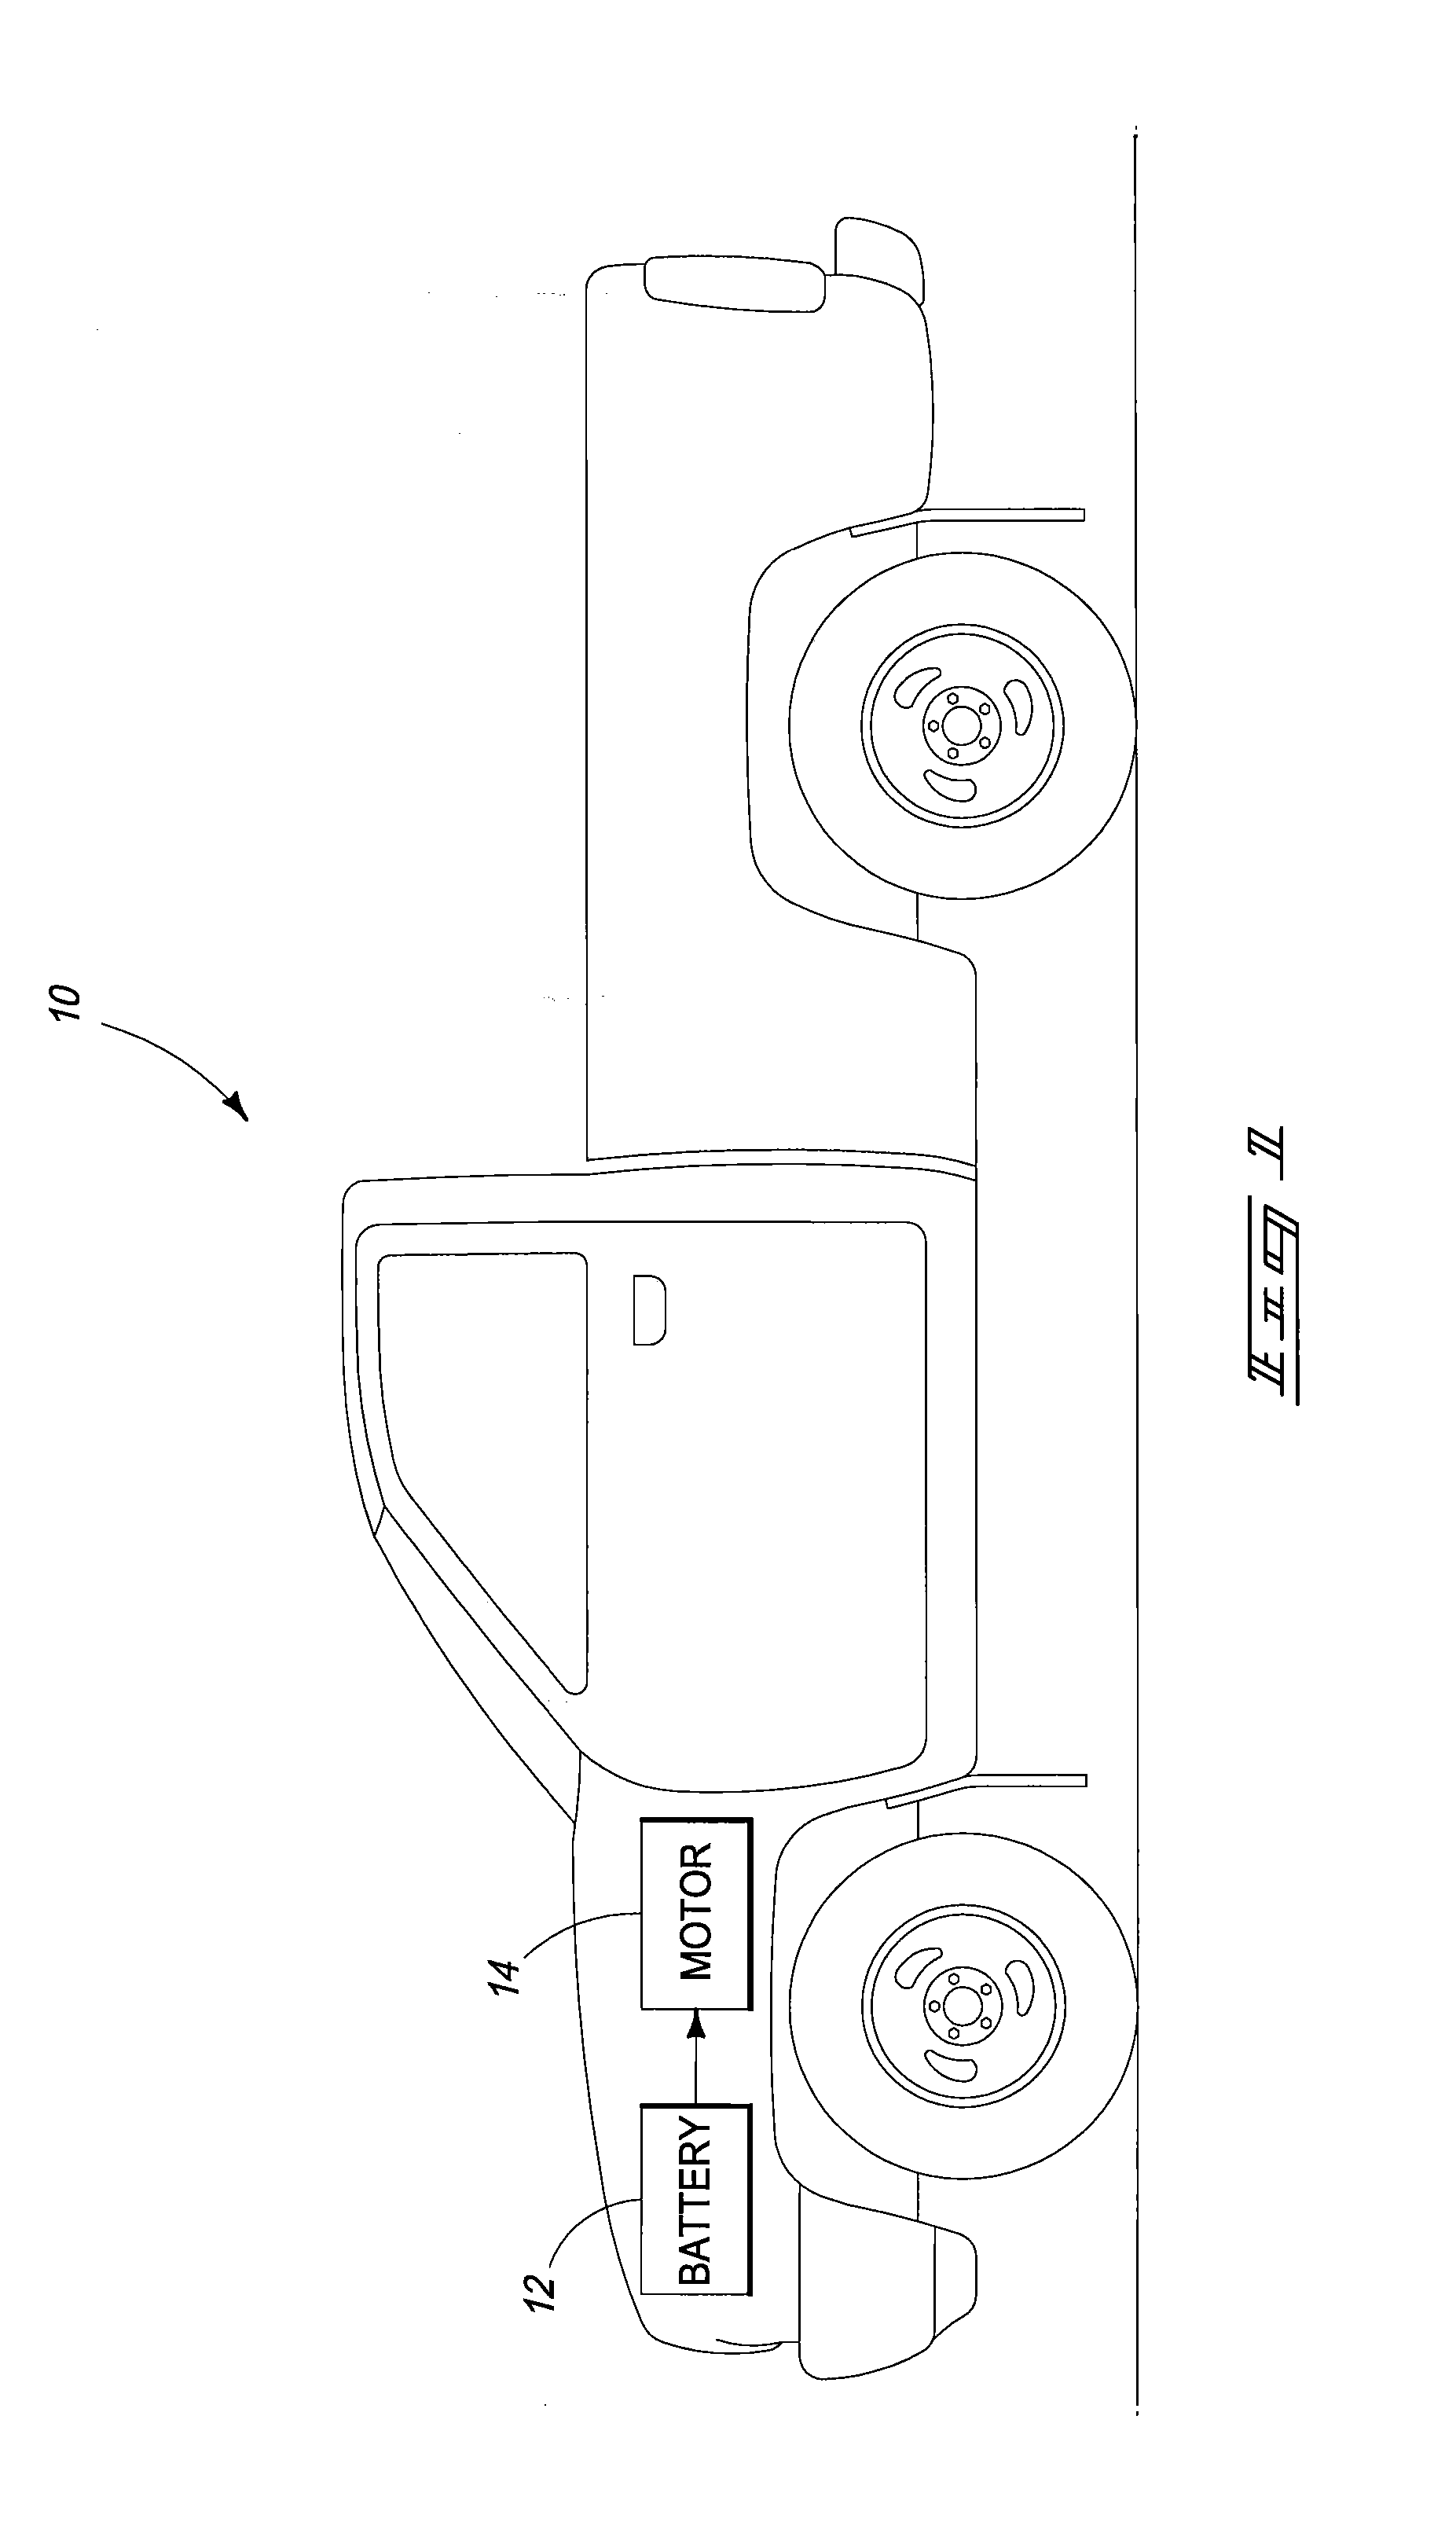 Battery Insulation Resistance Measurement Methods, Insulation Resistance Measurement Methods, Insulation Resistance Determination Apparatuses, And Articles Of Manufacture